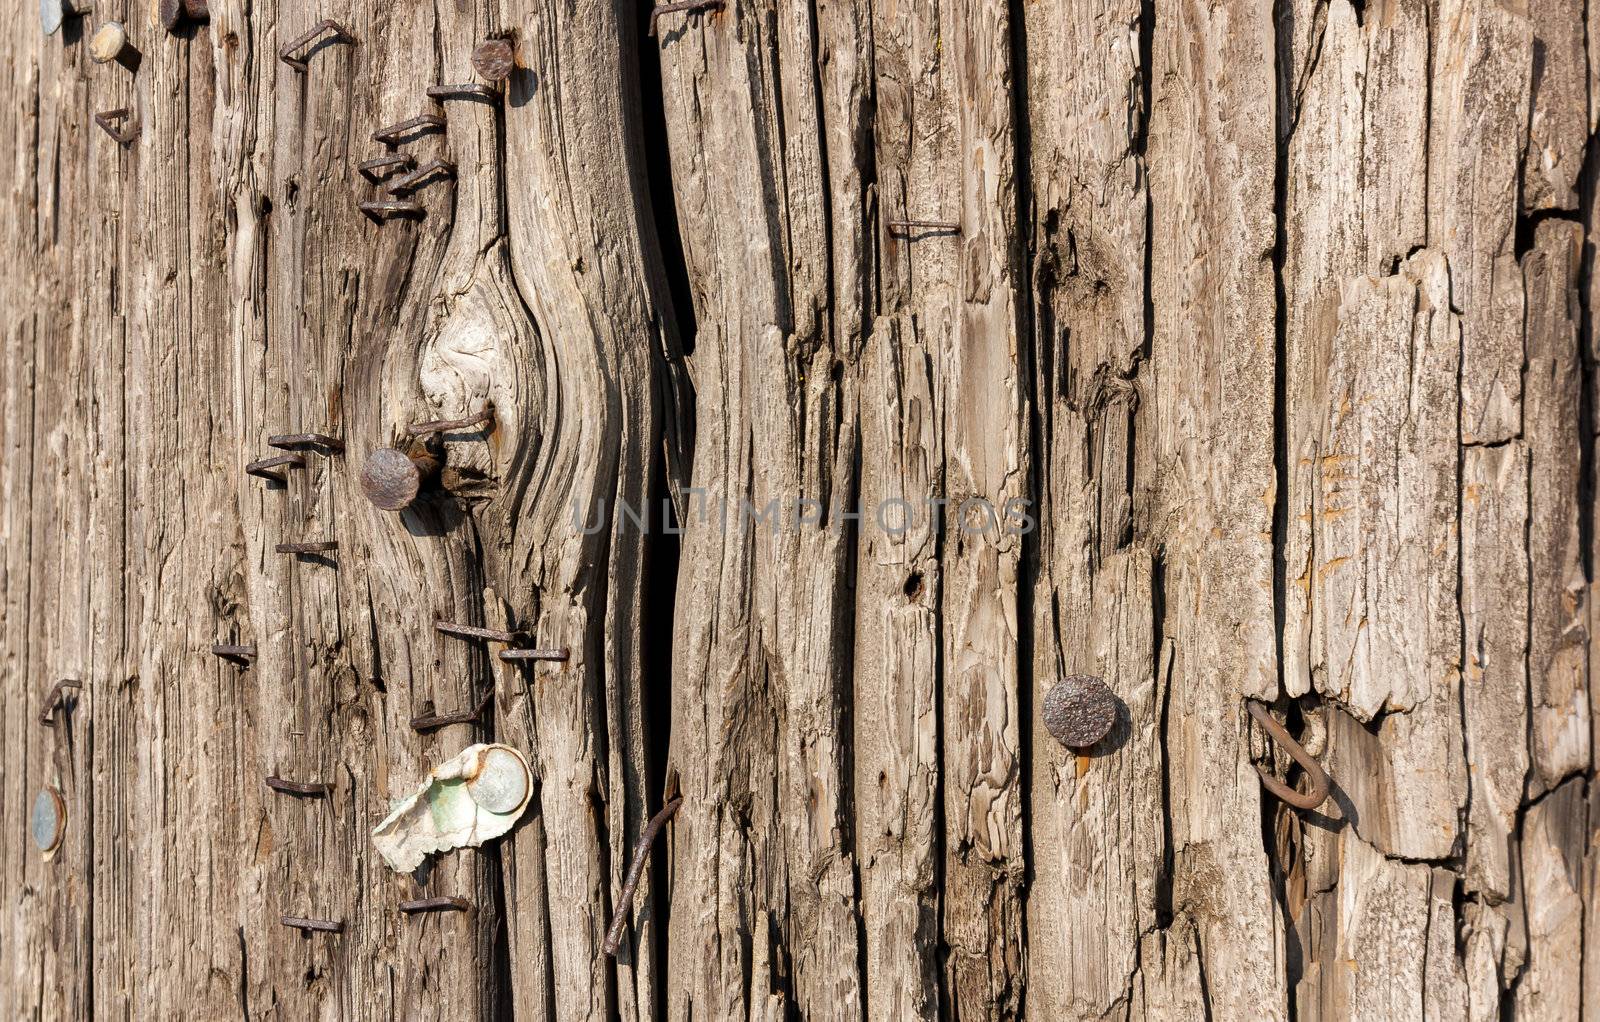 Worn Textured Telephone Pole Suitable for Background on Horizontal